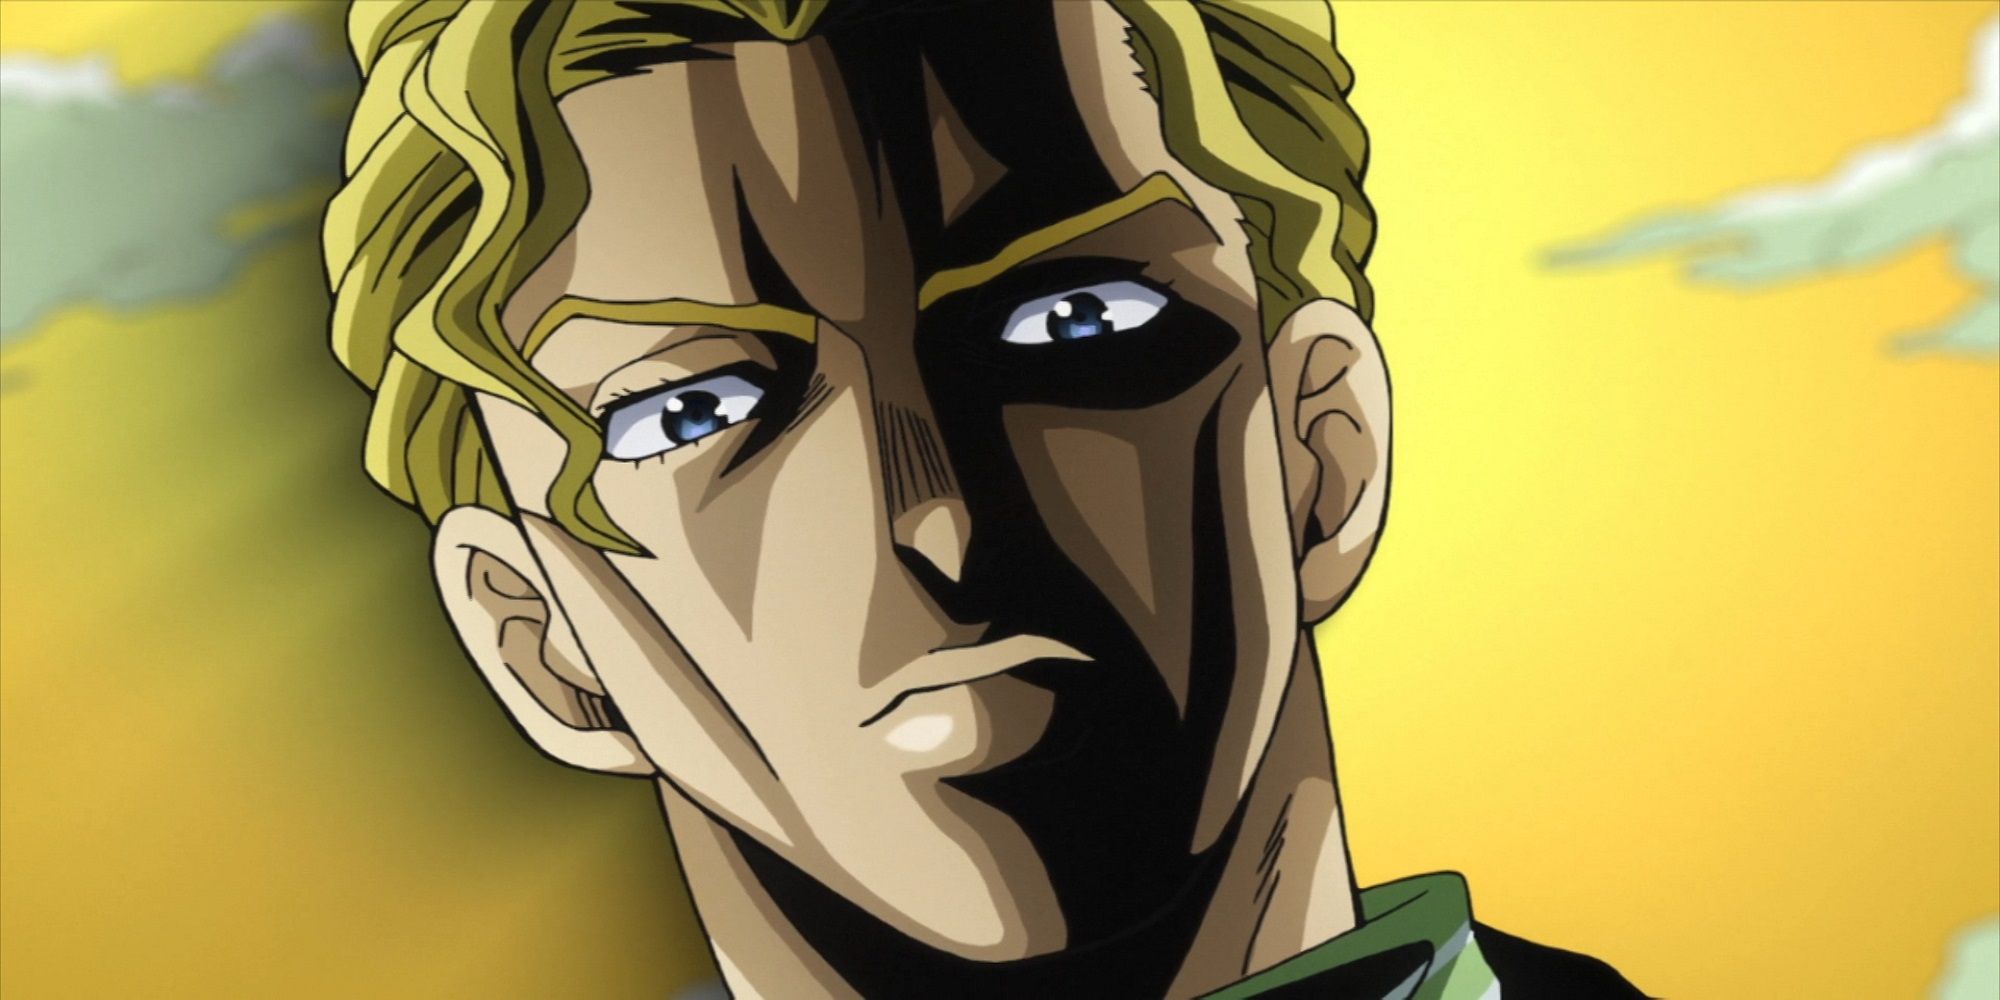 Yoshikage Kira in Diamond is Unbreakable looking down with a menacing expression.